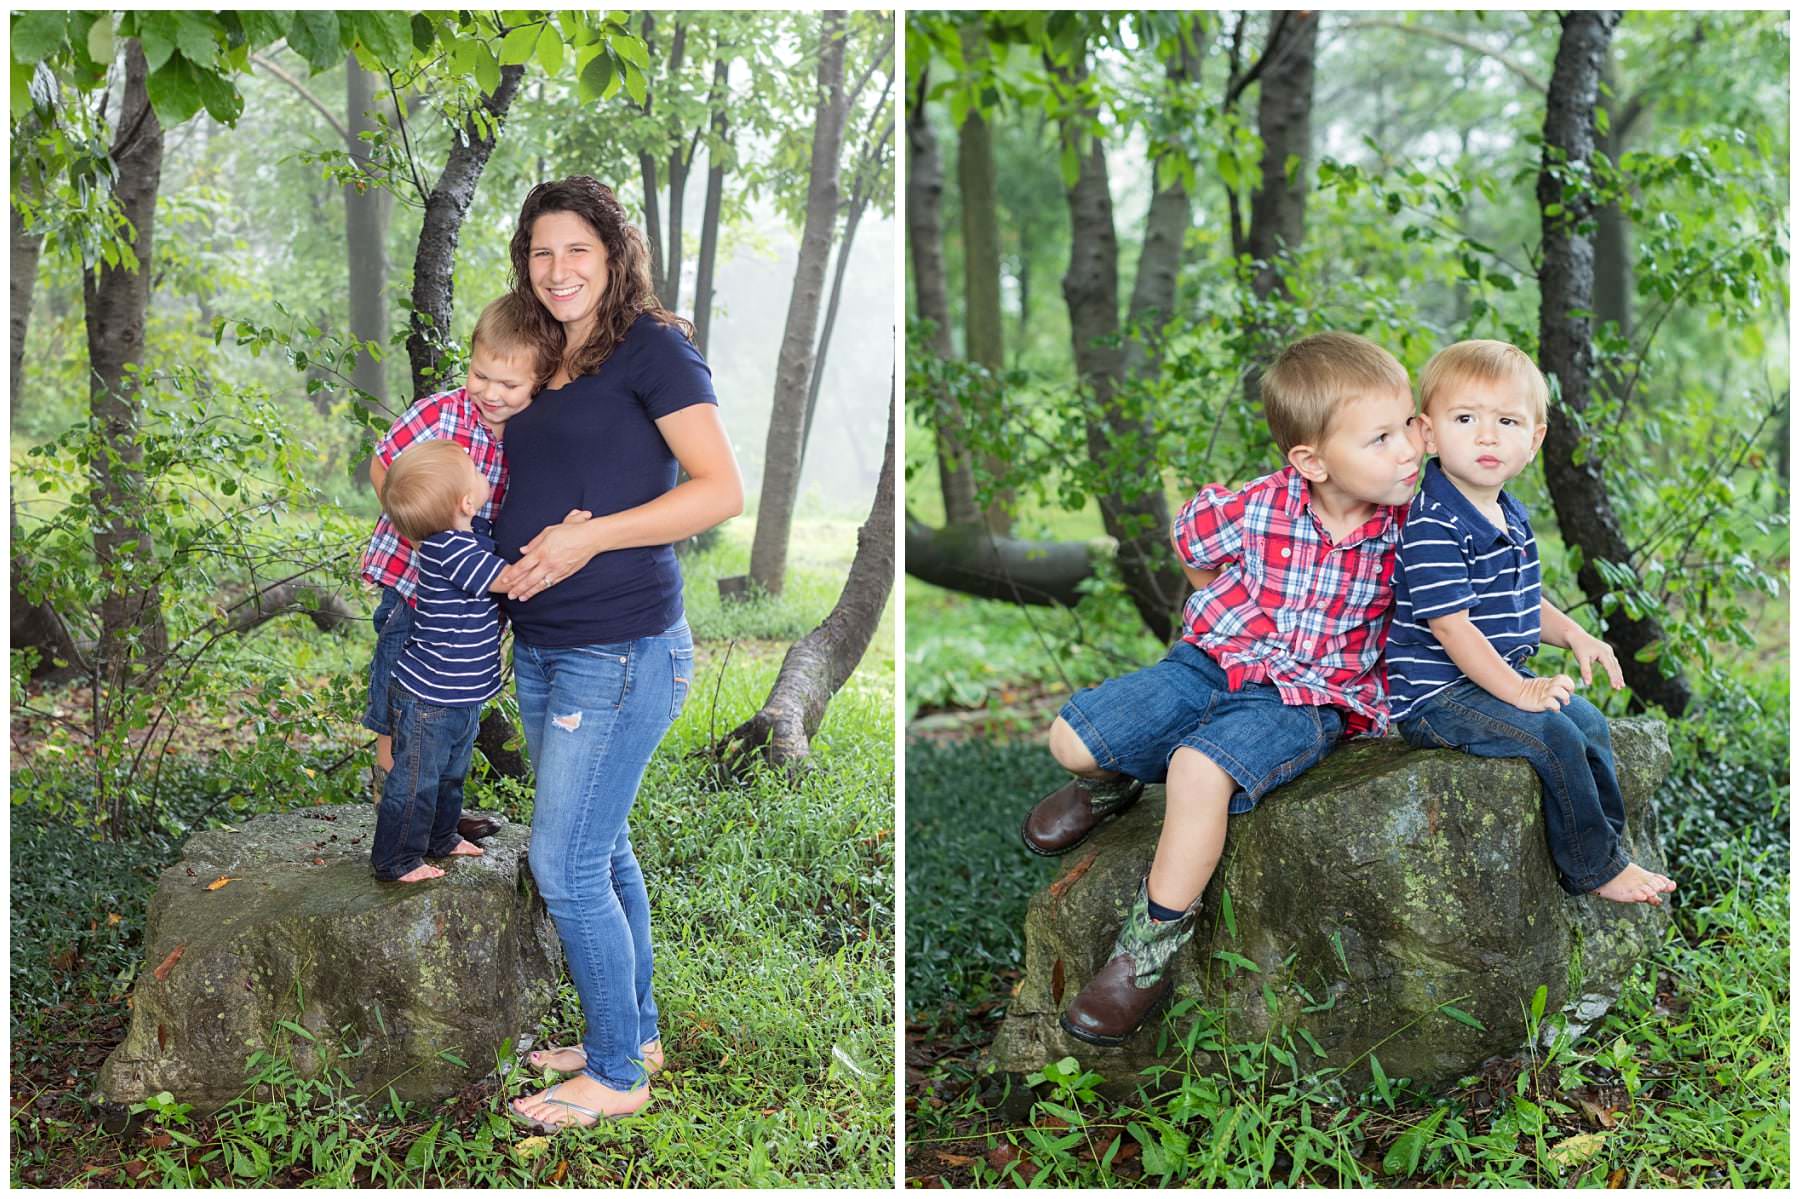 Outdoor kids portraits in woods with mother